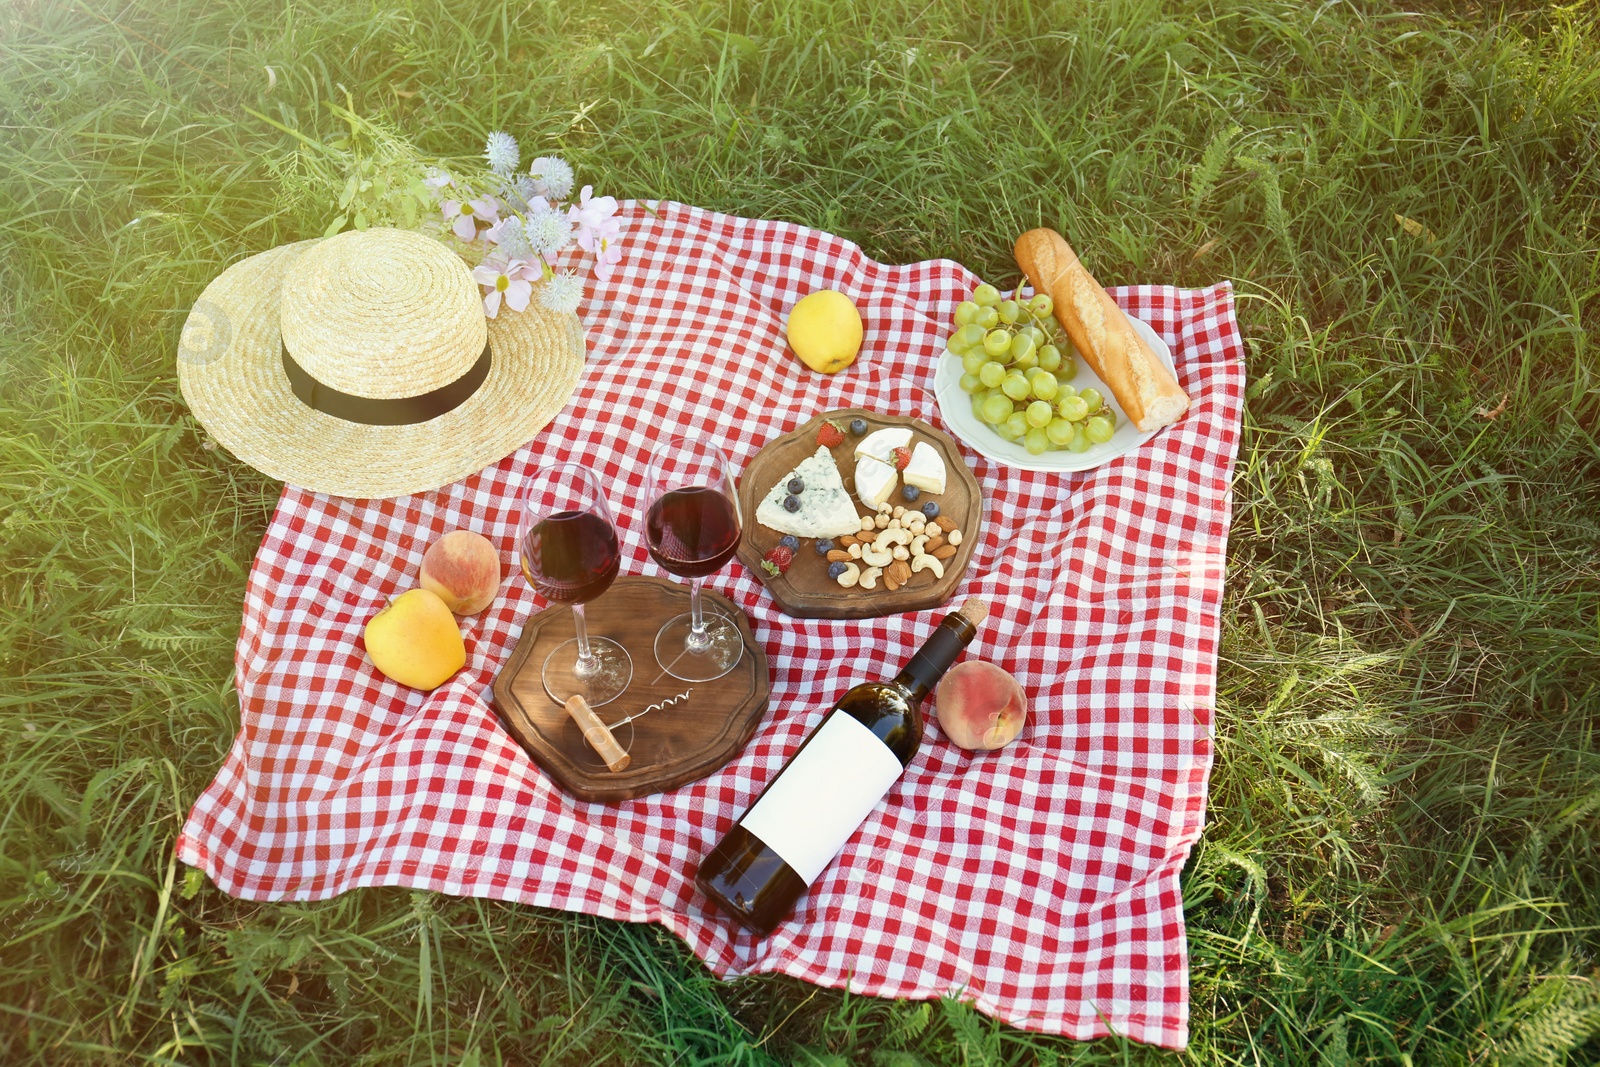 Photo of Picnic blanket with delicious food and wine on green grass in park